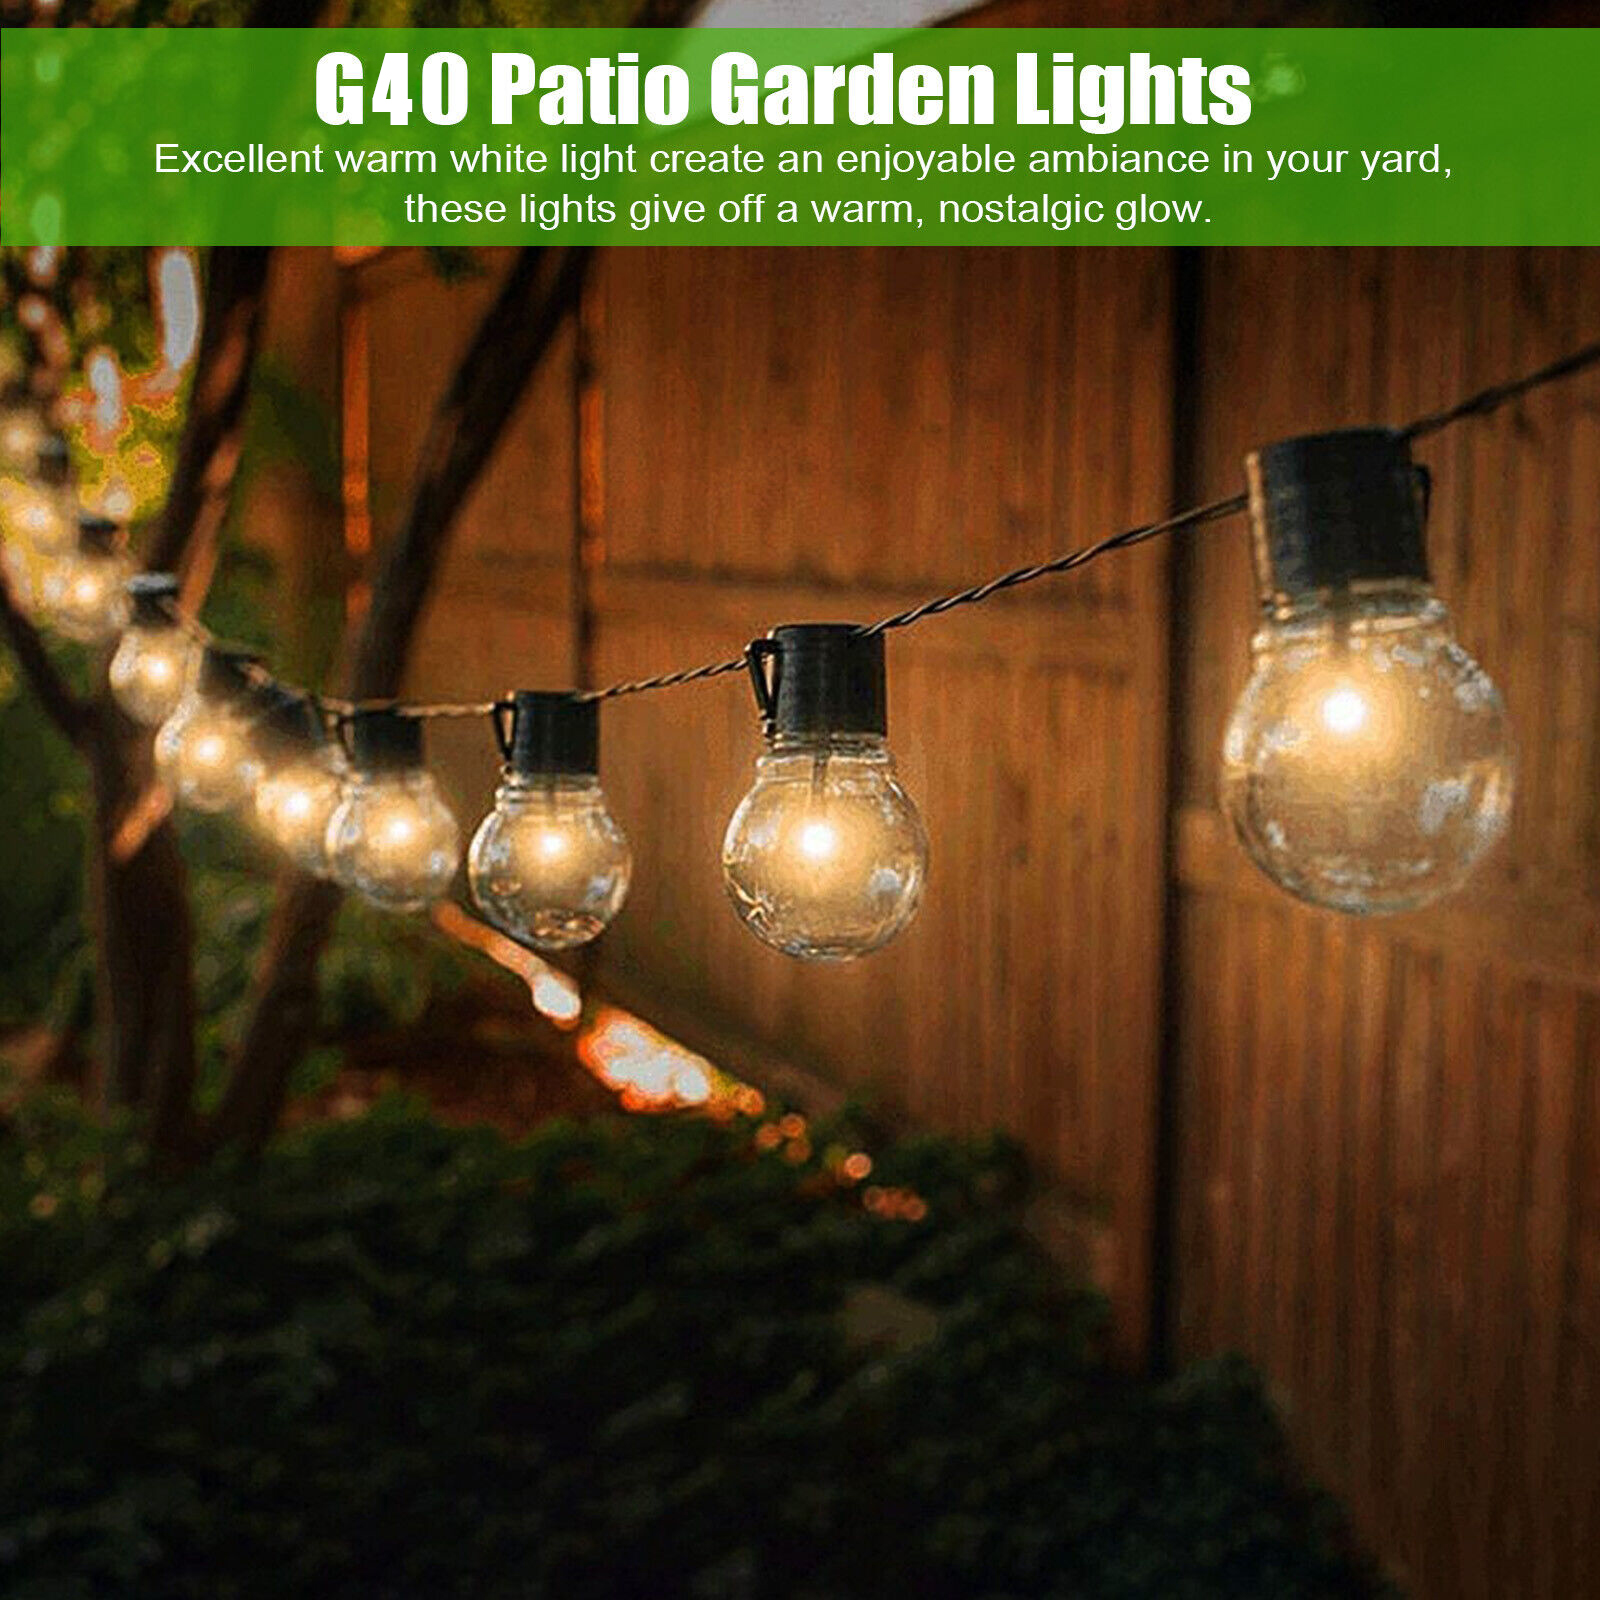 LED-Ceiling-Lights-Solar-Outdoor-Light-String-5M-20LED-Bulb-LED-Transparent-Ball-Night-Light-IP55-Waterproof-Camping-Atmosphere-Tent-Light-Christmas-Day-Decoration-Light-11